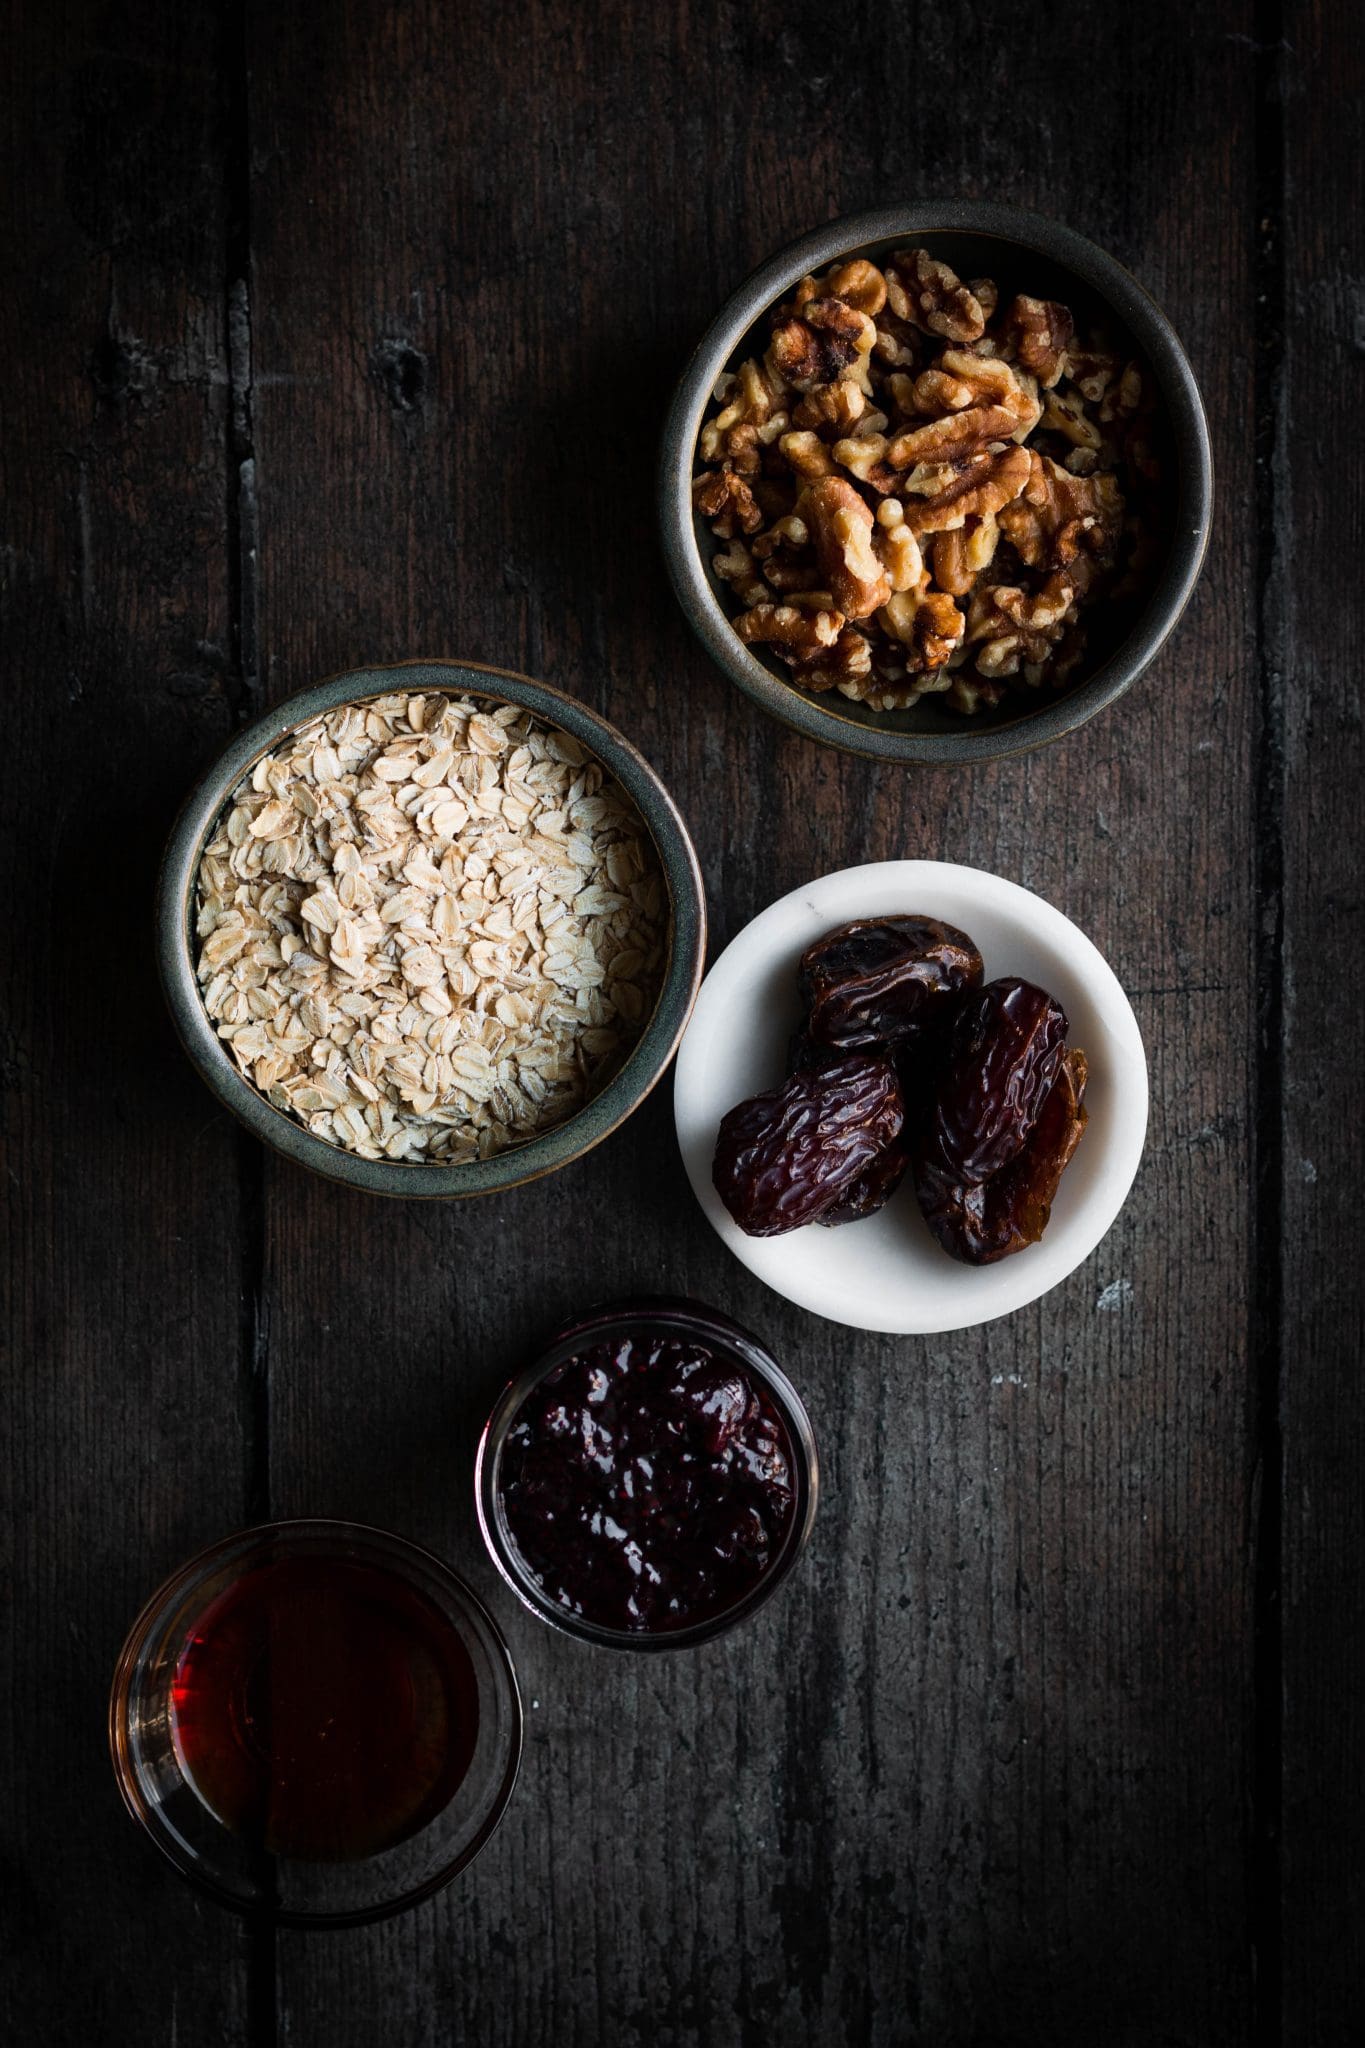 walnuts, oats, dates, jam and maple in bowls